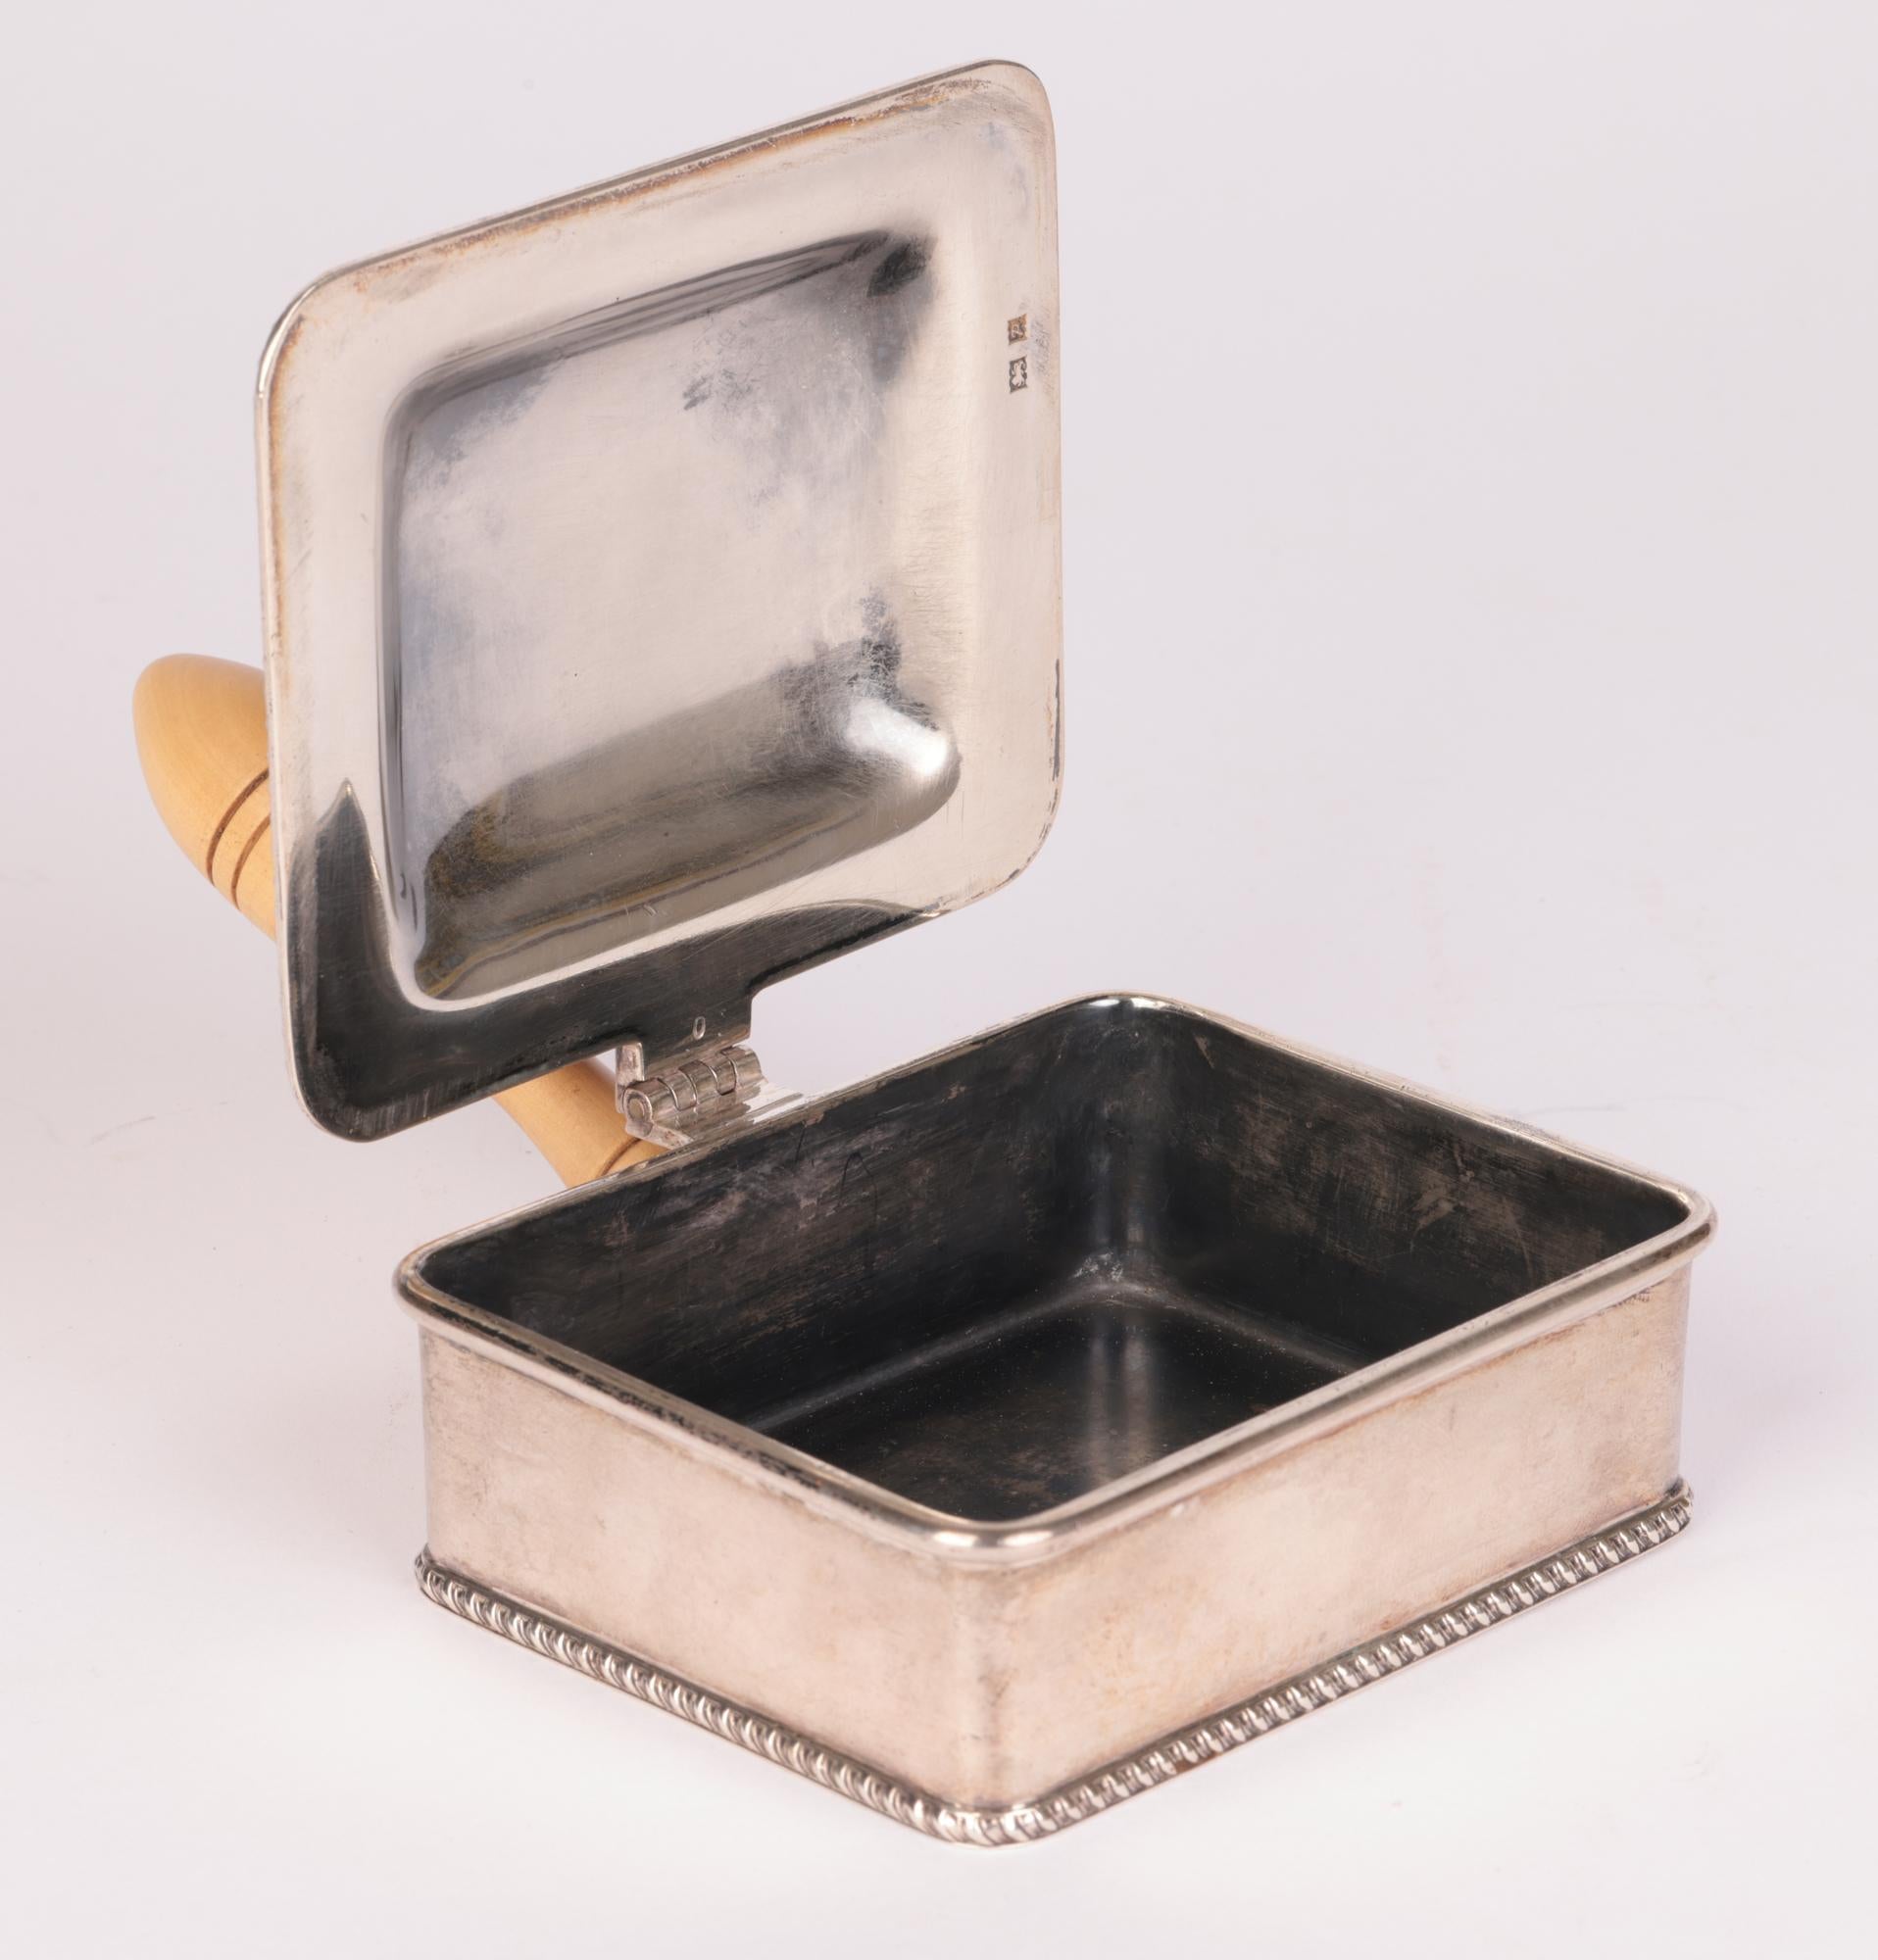 A stylish Continental, probably Dutch, wooden handled silver ashtray or cheroot holder dating from the 19th century. The heavily made container is of rectangular shape with hinged cover with a raised leaf thumb handle and small wooden turned handle.